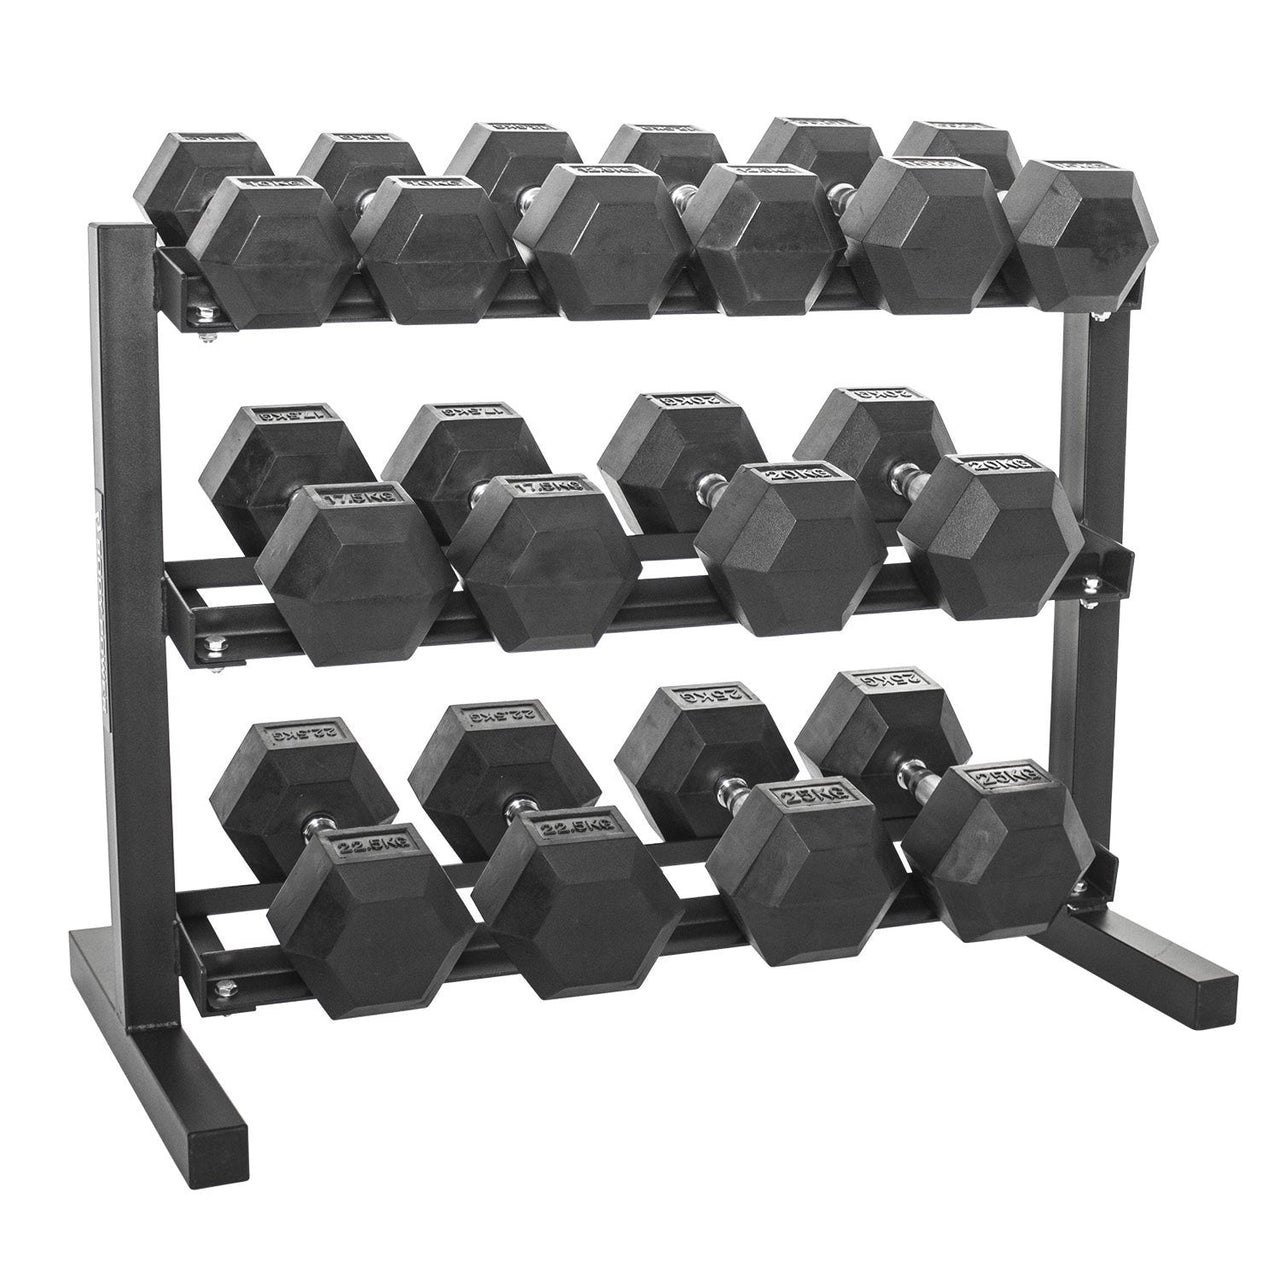 Combo Offer - Hex Dumbbell Set 2.5 Kg to 20 Kg with Dumbbell Rack and Flat Bench A0011